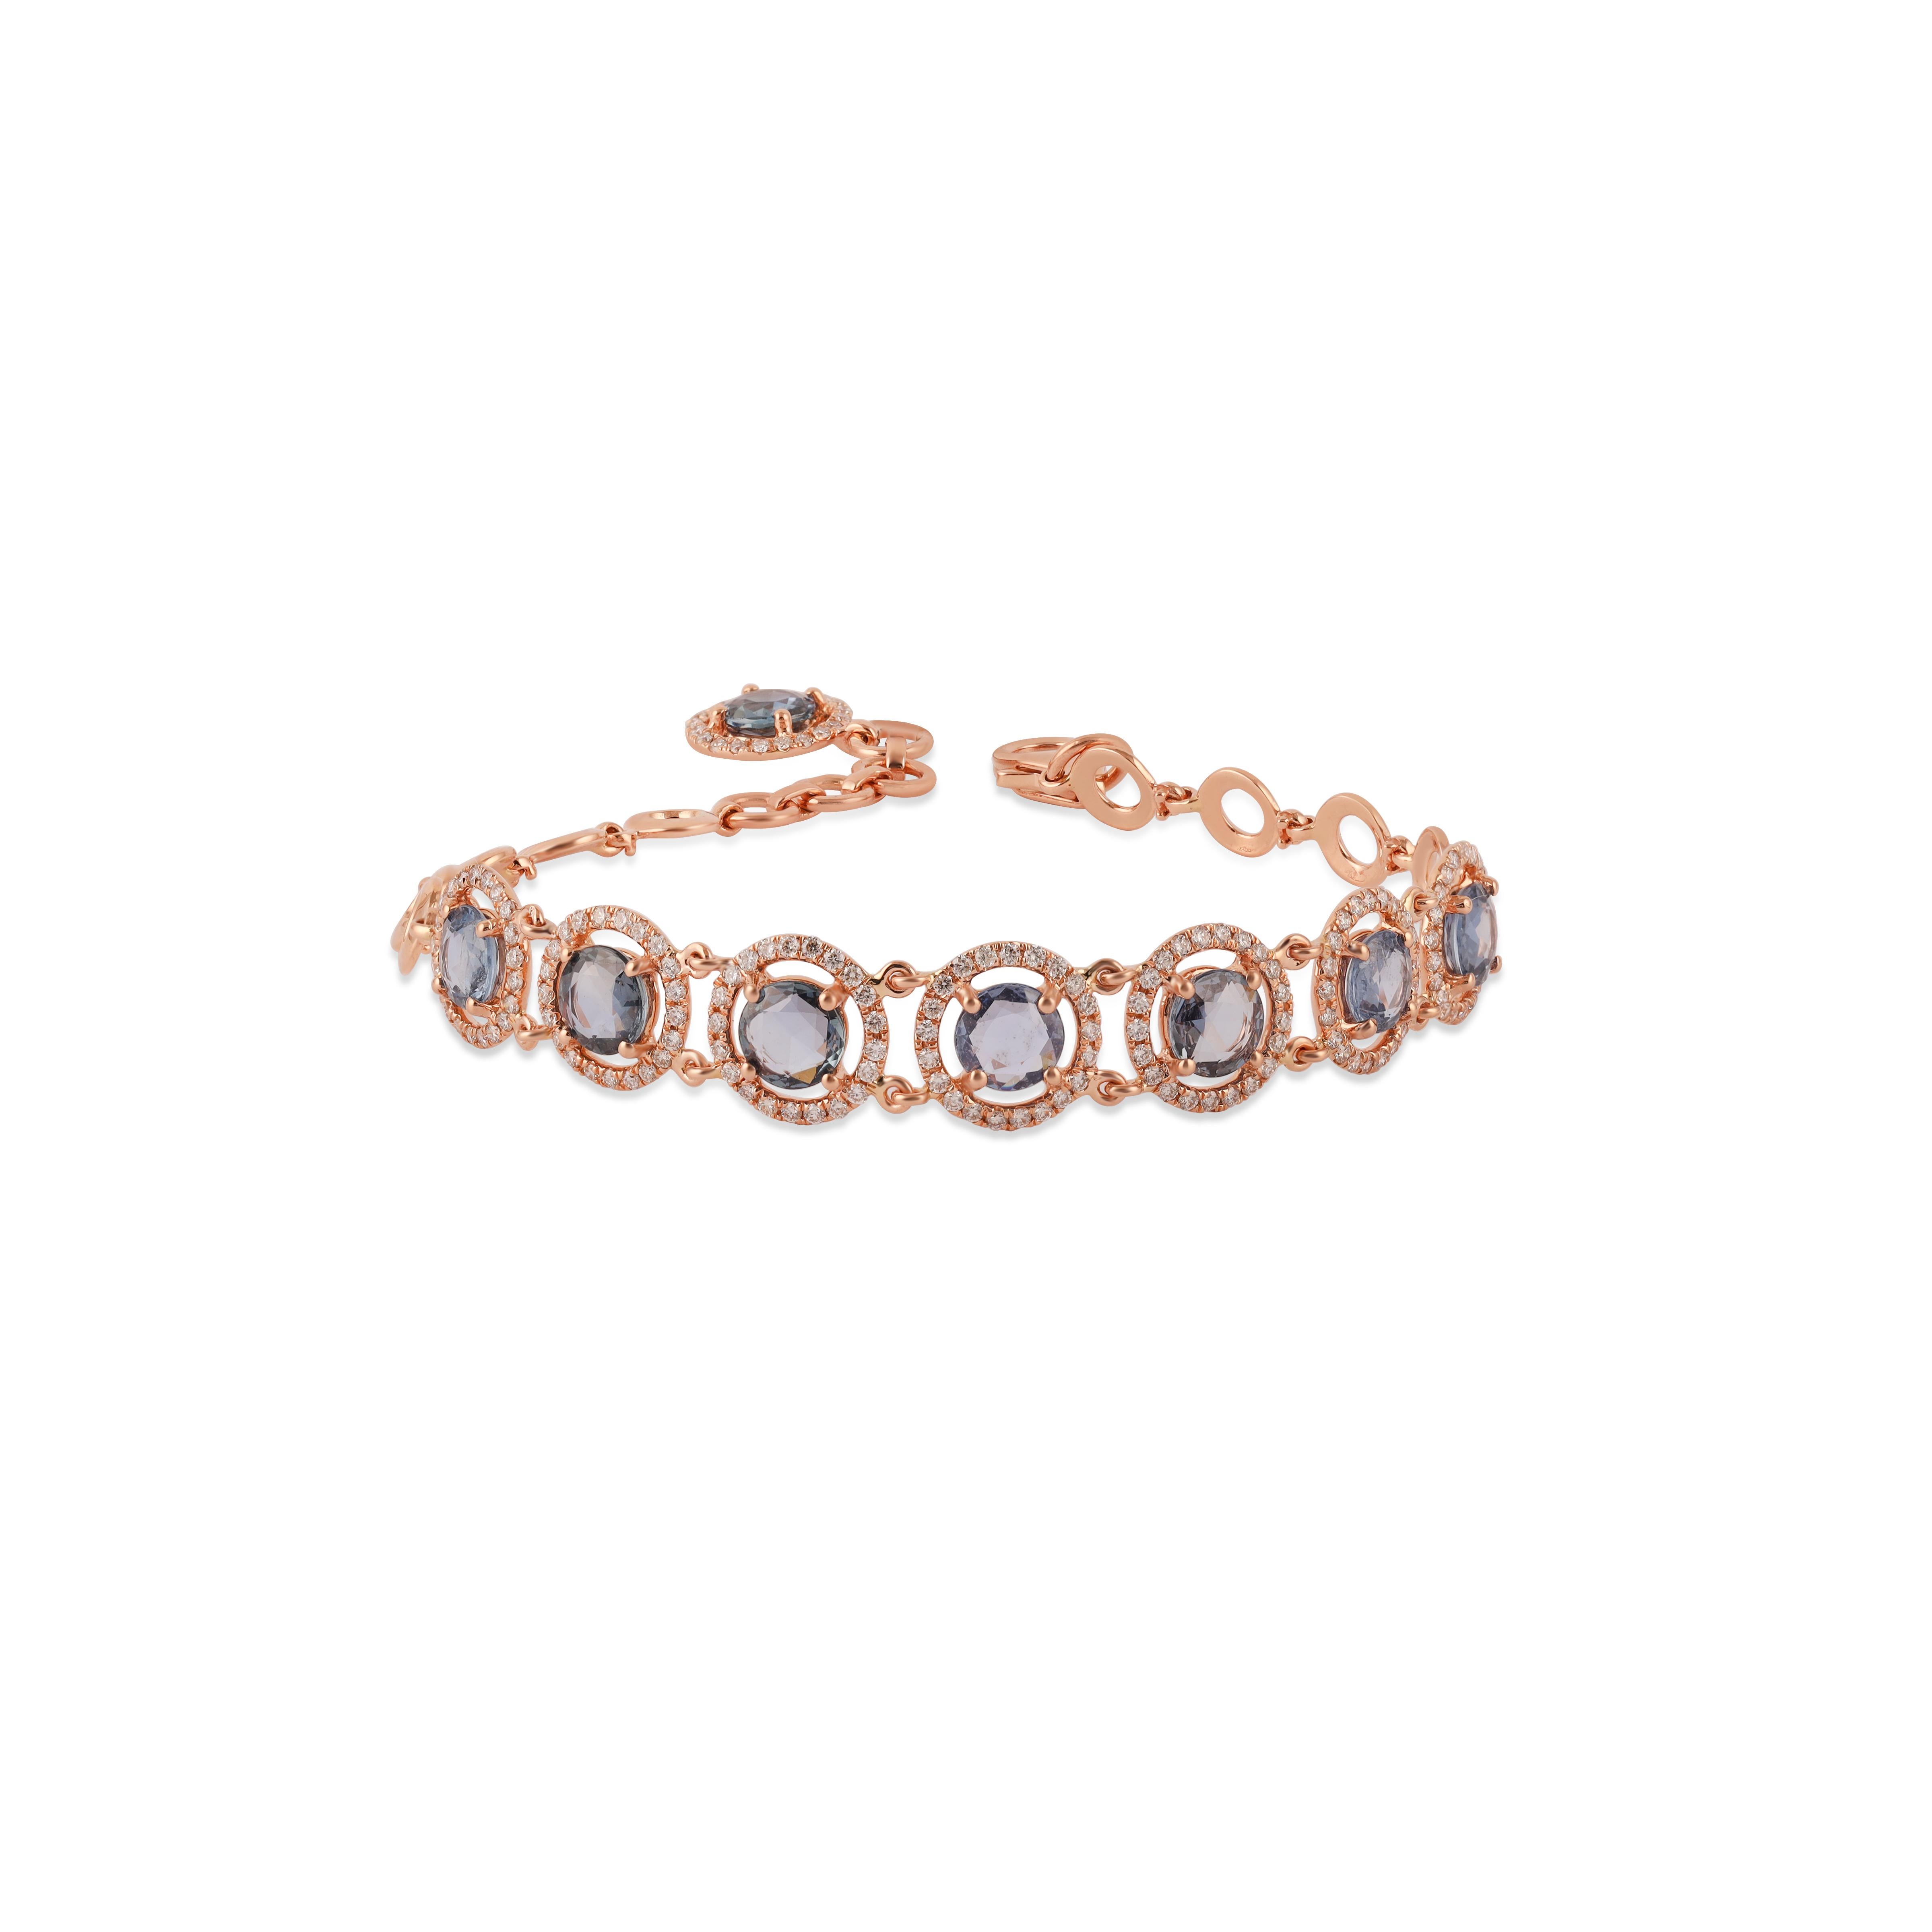 A very beautiful and dainty Sapphire Chain Bracelet let in 18K Rose Gold & Diamonds. The weight of the Blue Sapphires is 3.63 carats. The weight of the Diamonds is 1.00 carats. Net Gold weight is 7.31 Gram.


Size - regular 6.5